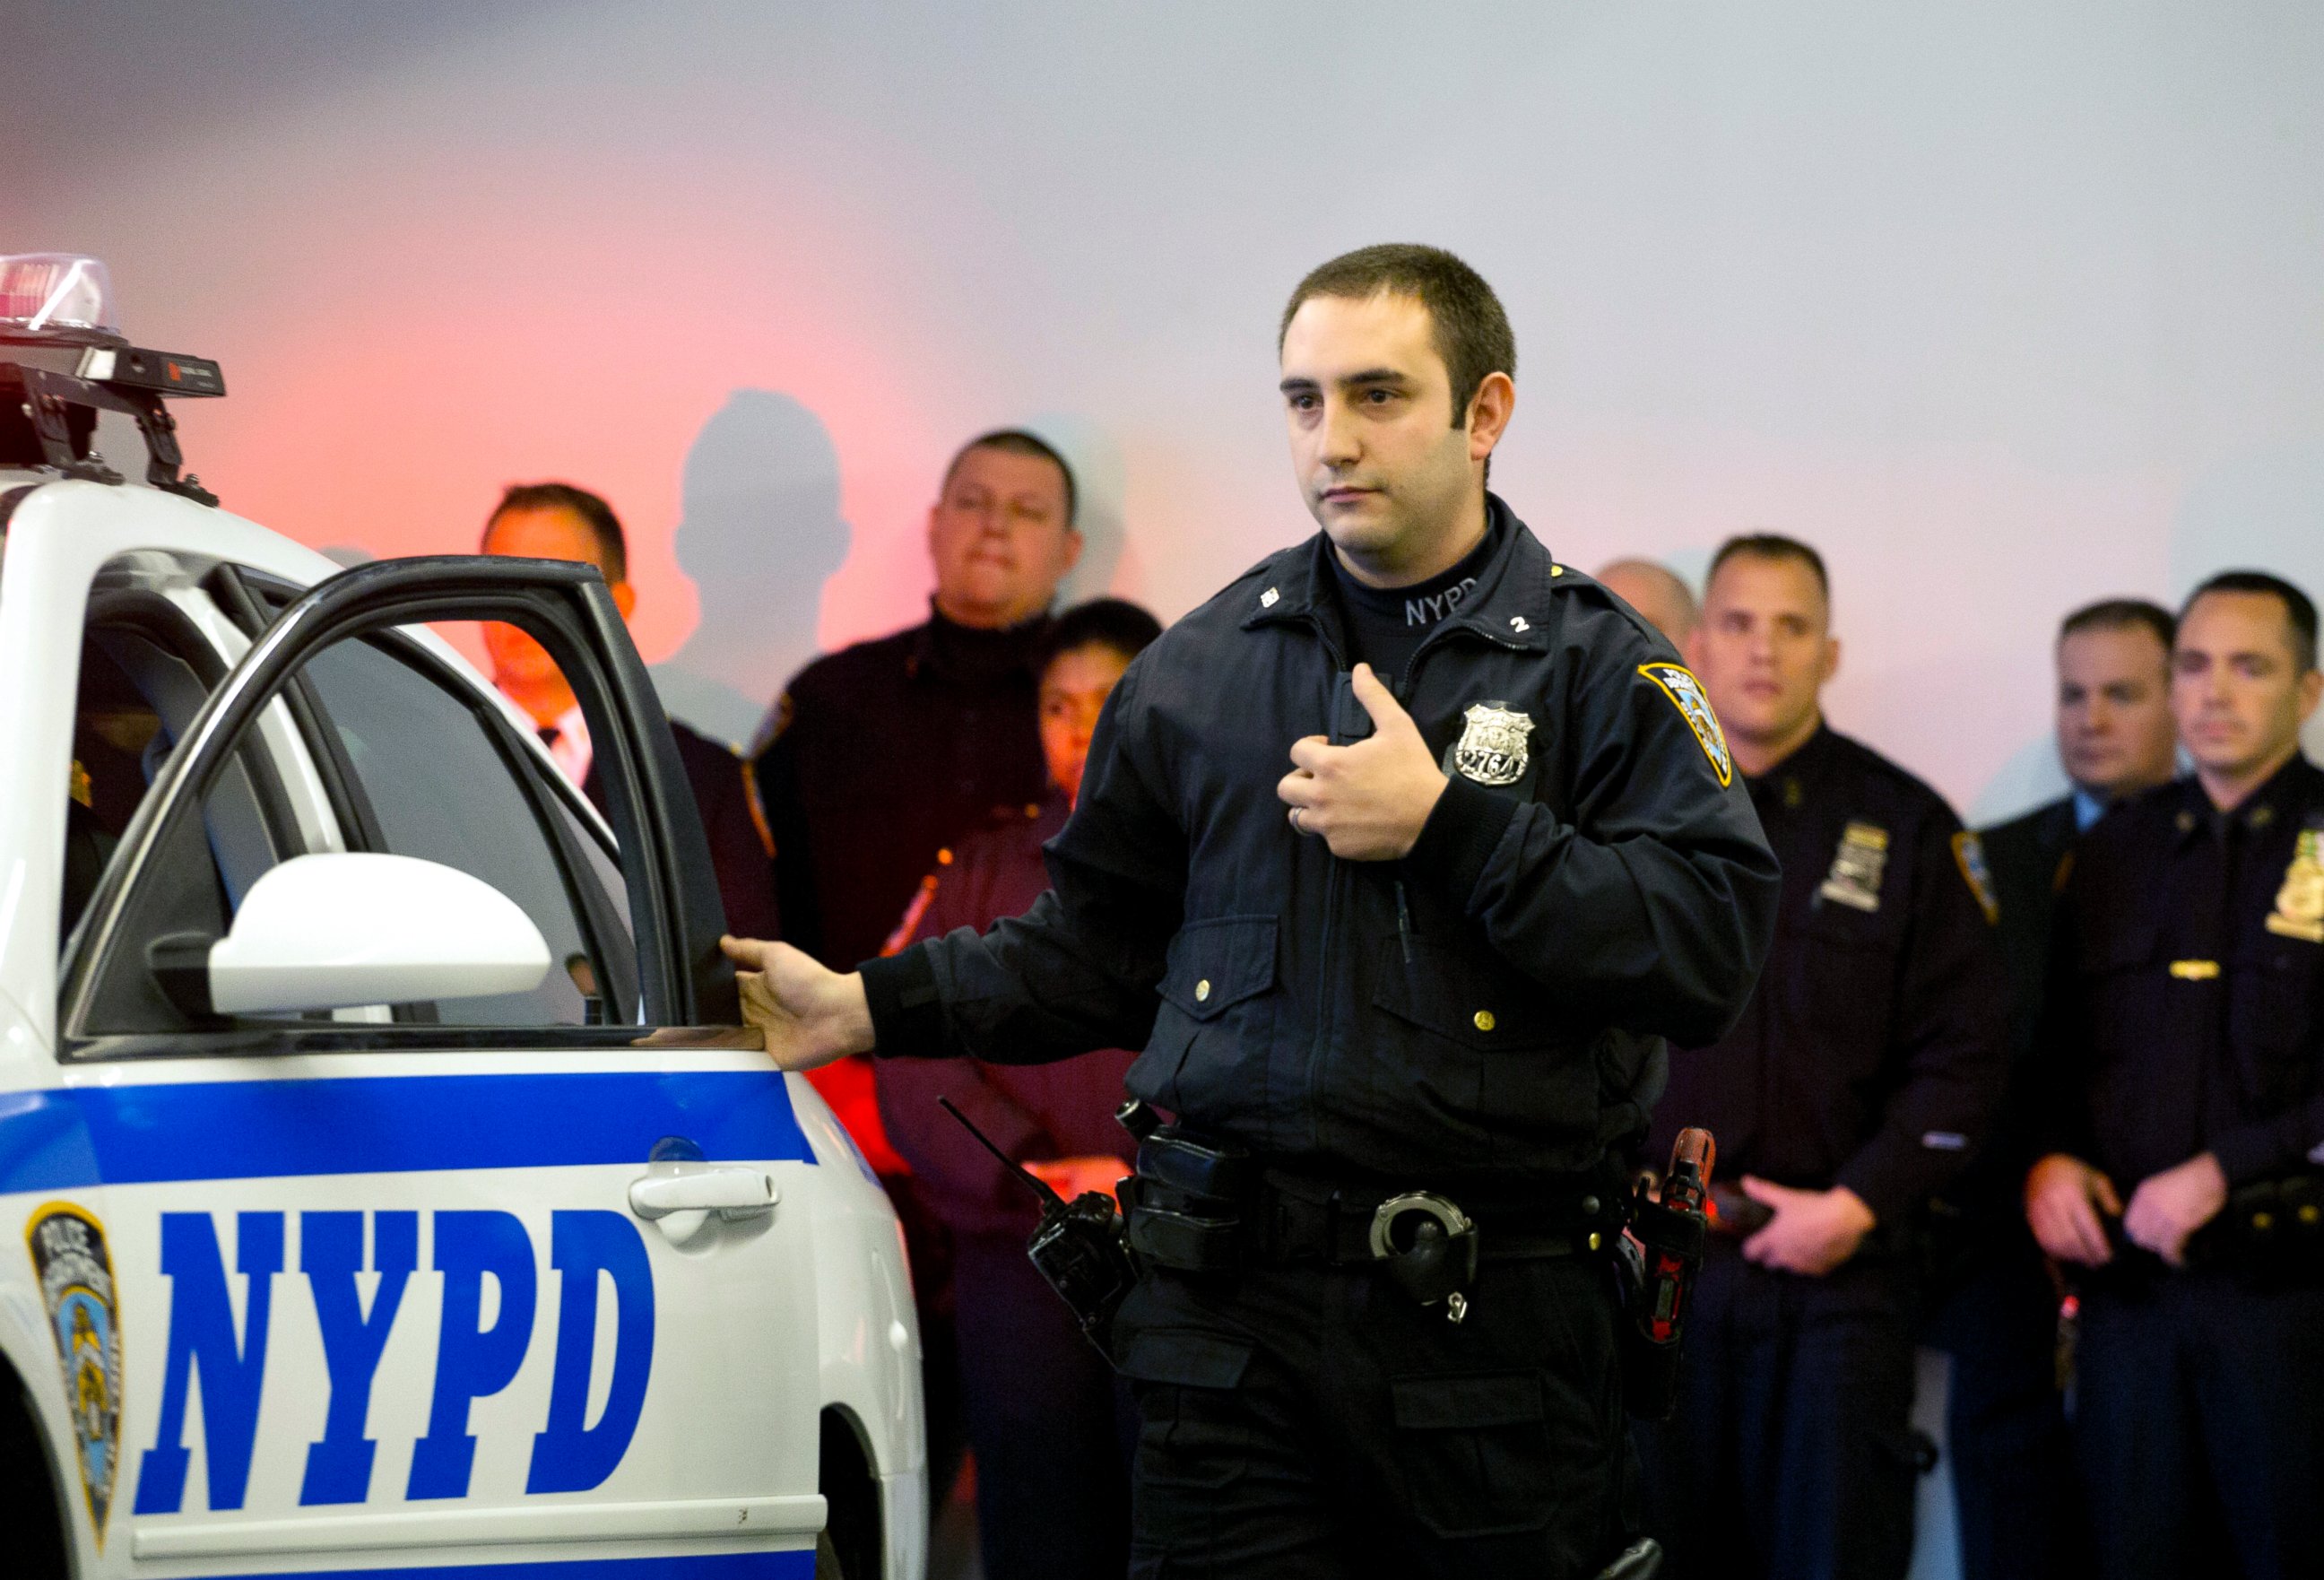 PHOTO: New York Police Department officer Joshua Jones turns on a body camera attached to his chest during a traffic stop training demonstration for the media, Dec. 3, 2014 in New York.